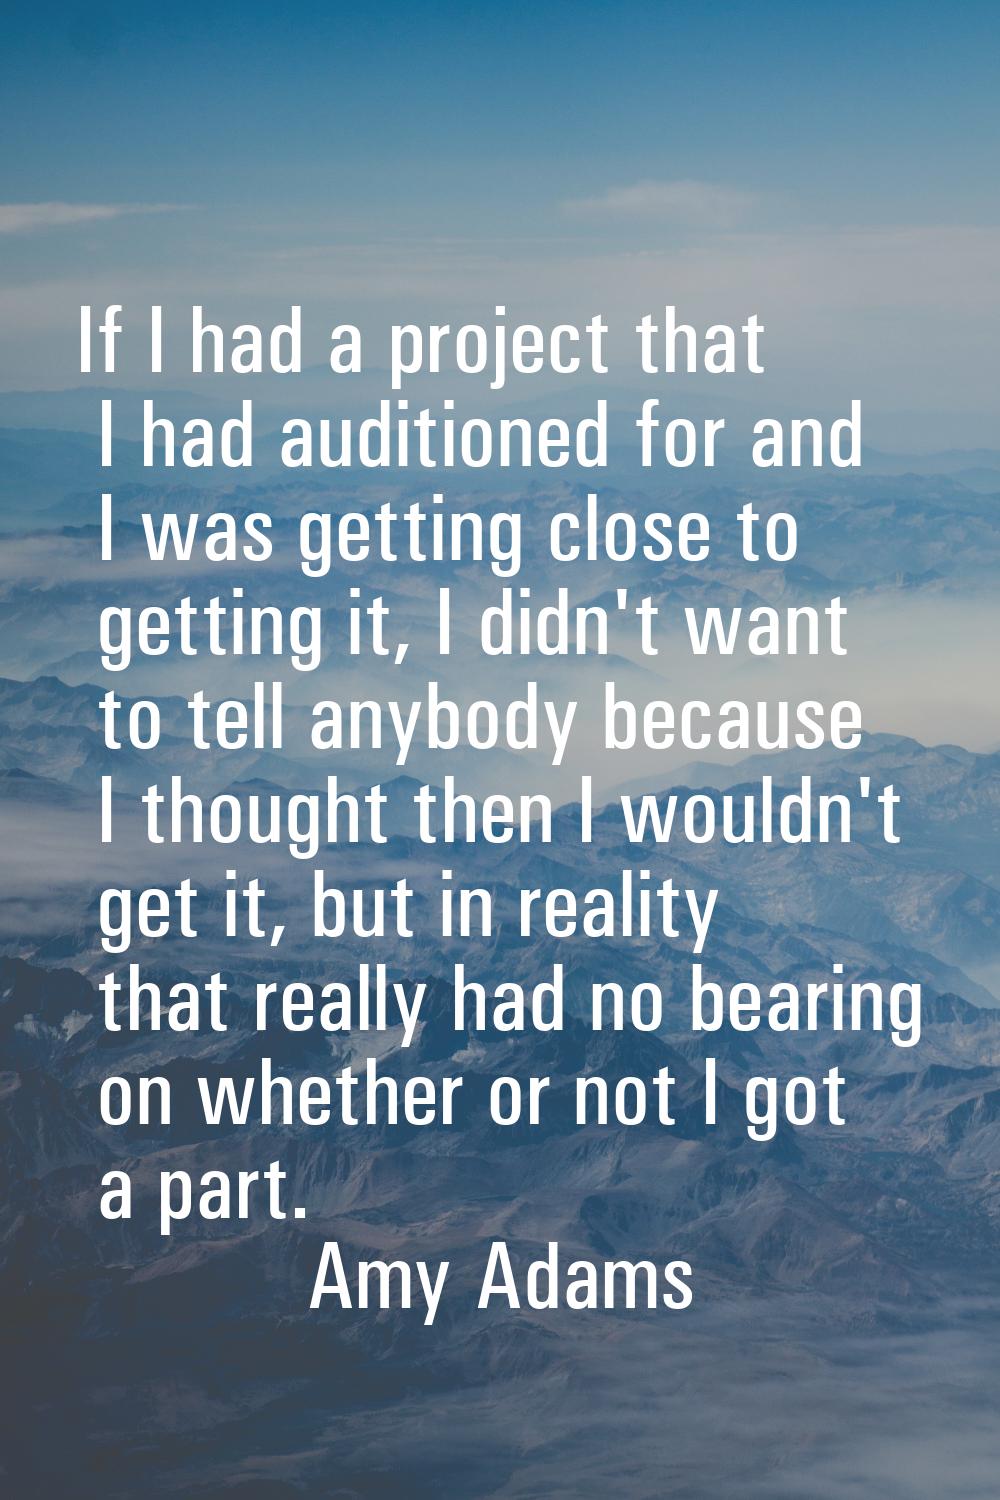 If I had a project that I had auditioned for and I was getting close to getting it, I didn't want t